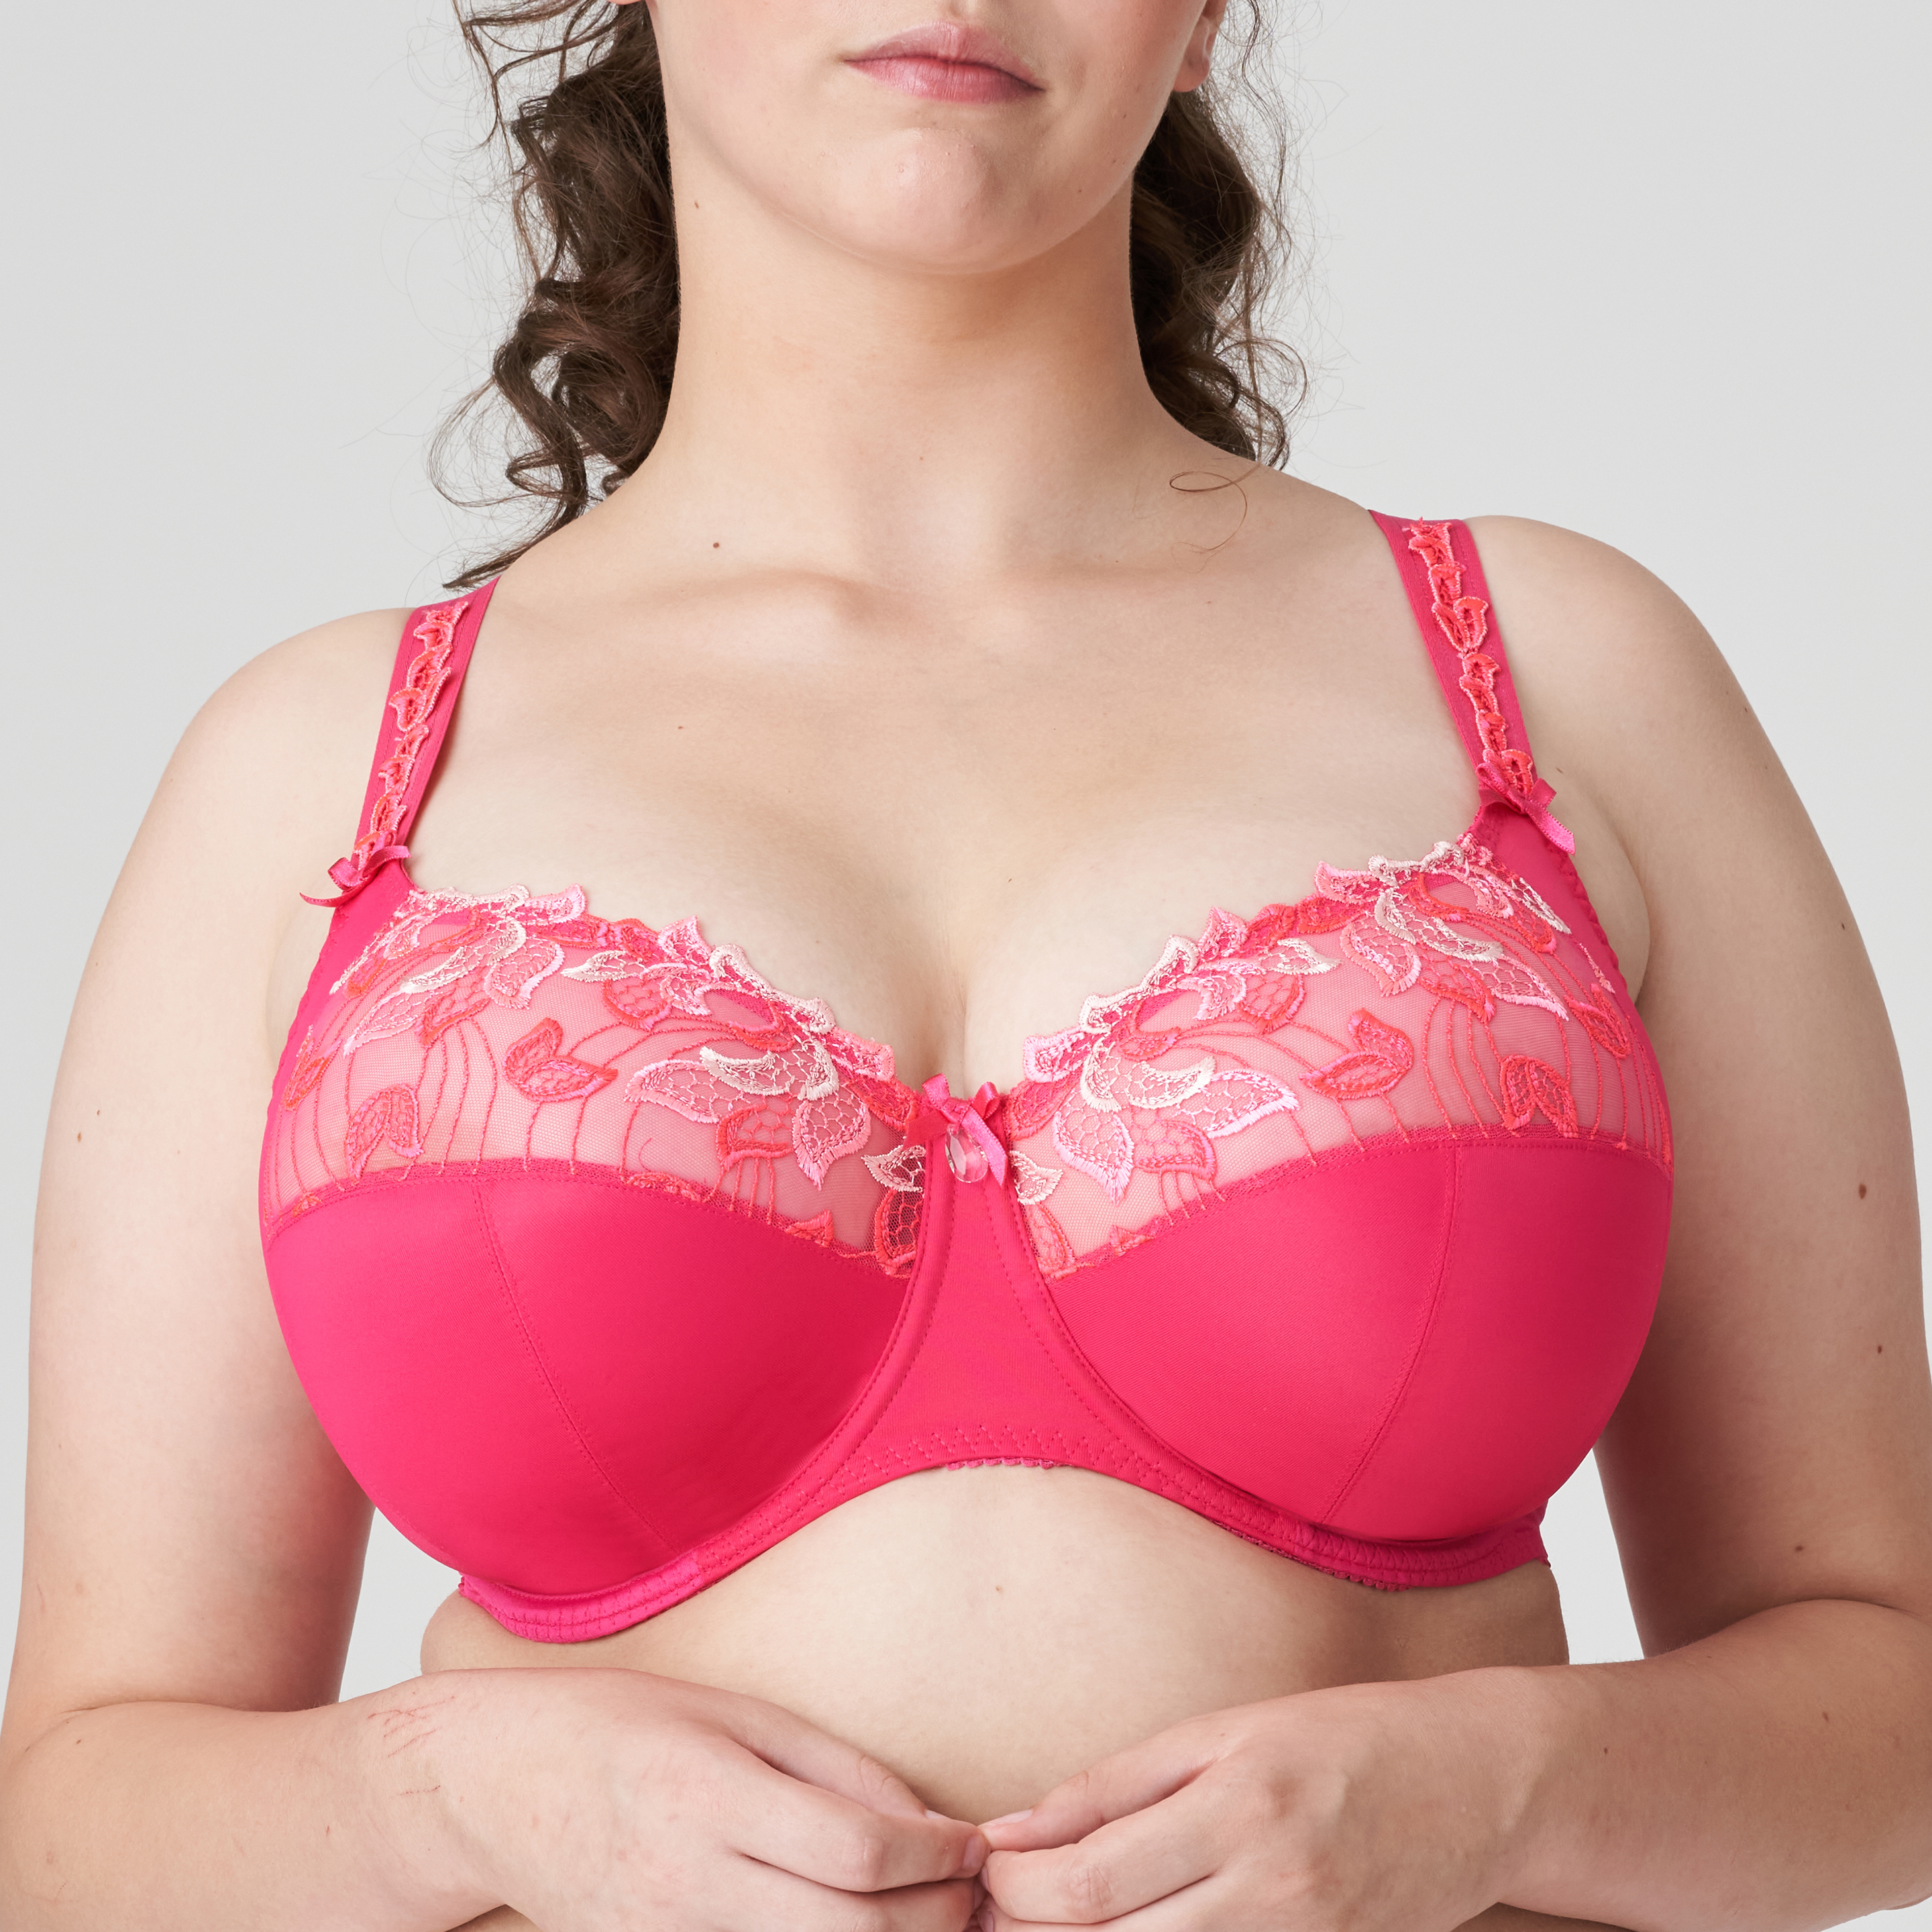 PrimaDonna Deauville Amour Full Cup Bra